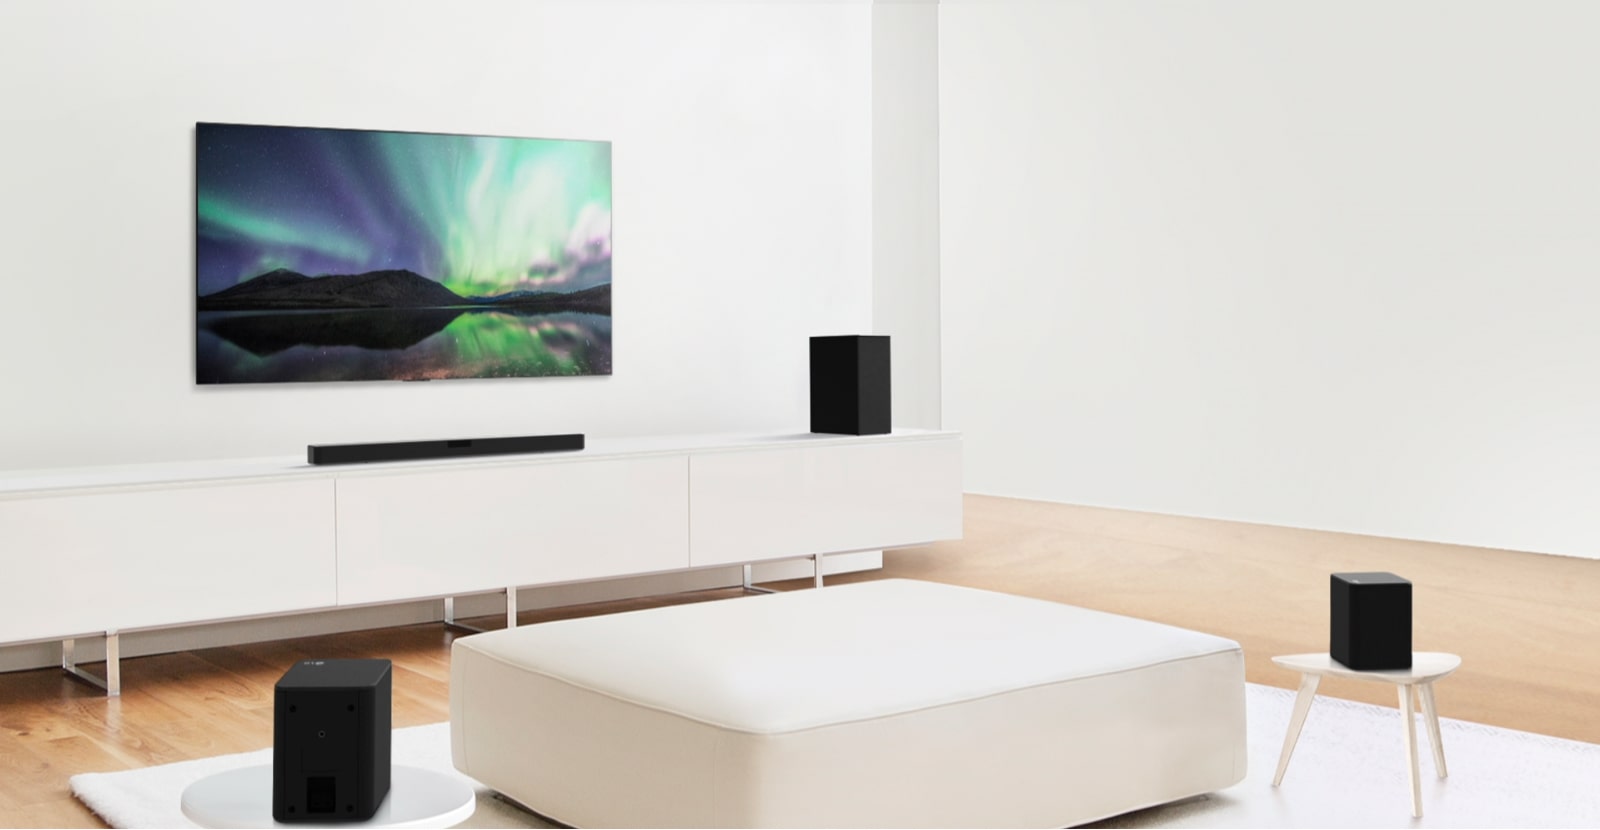 Video preview showing LG Soundbar in a white living room with 4.1 channel setup. 